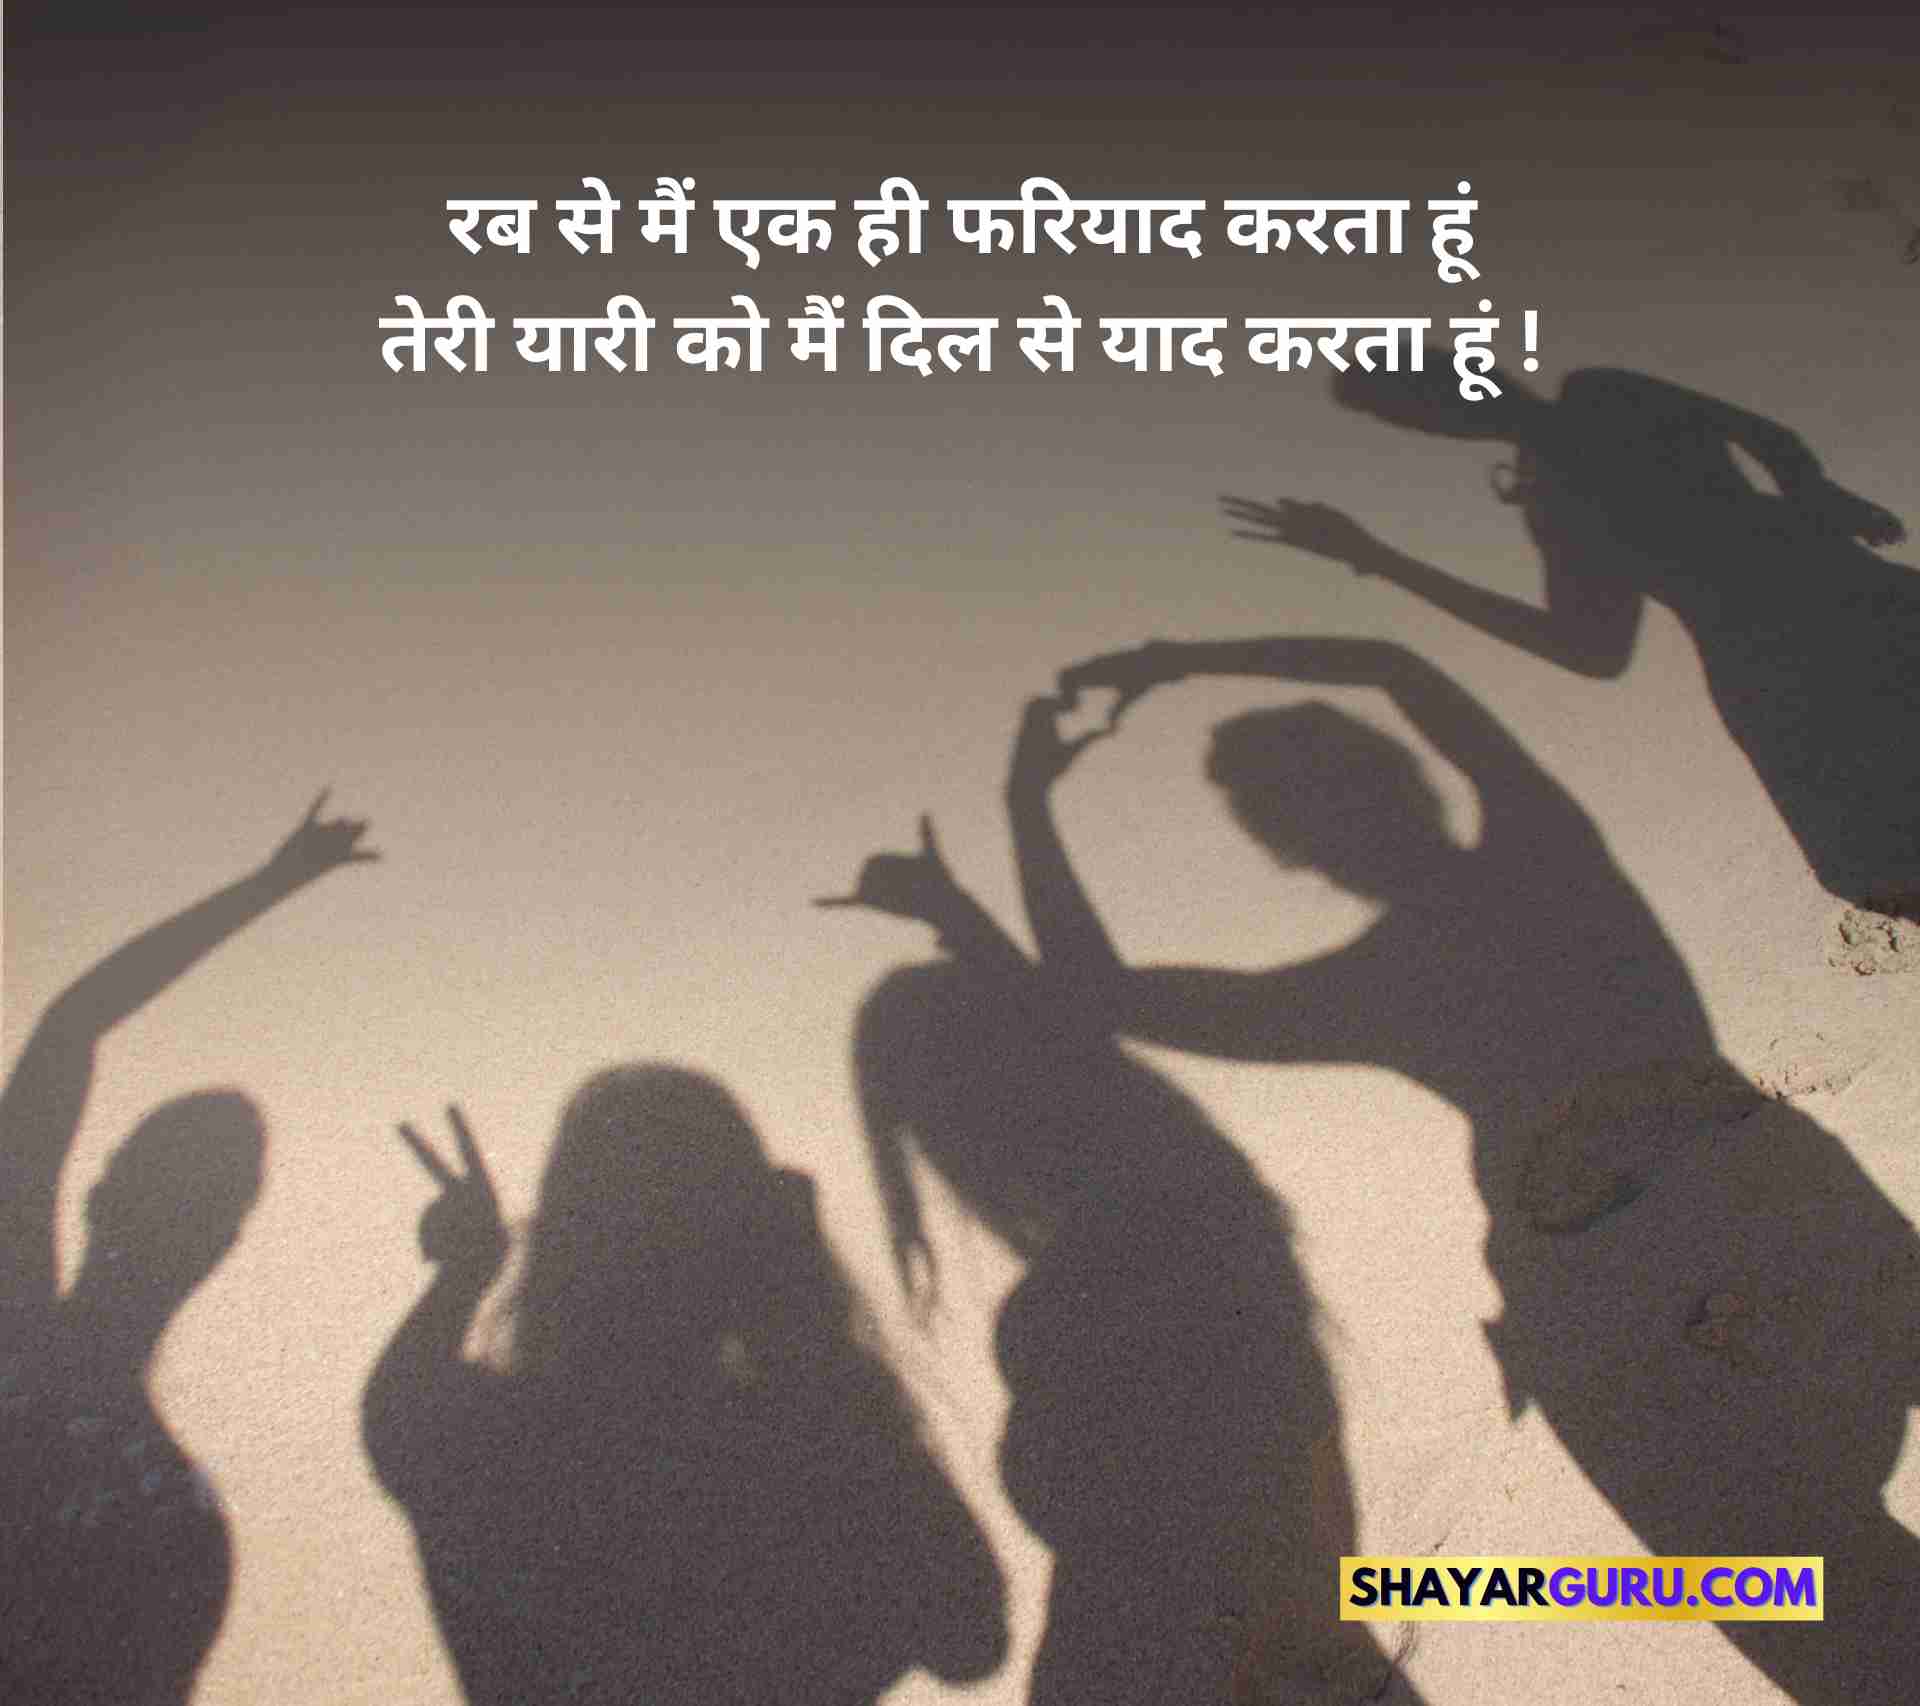 Friendship Quotes in Hindi Image